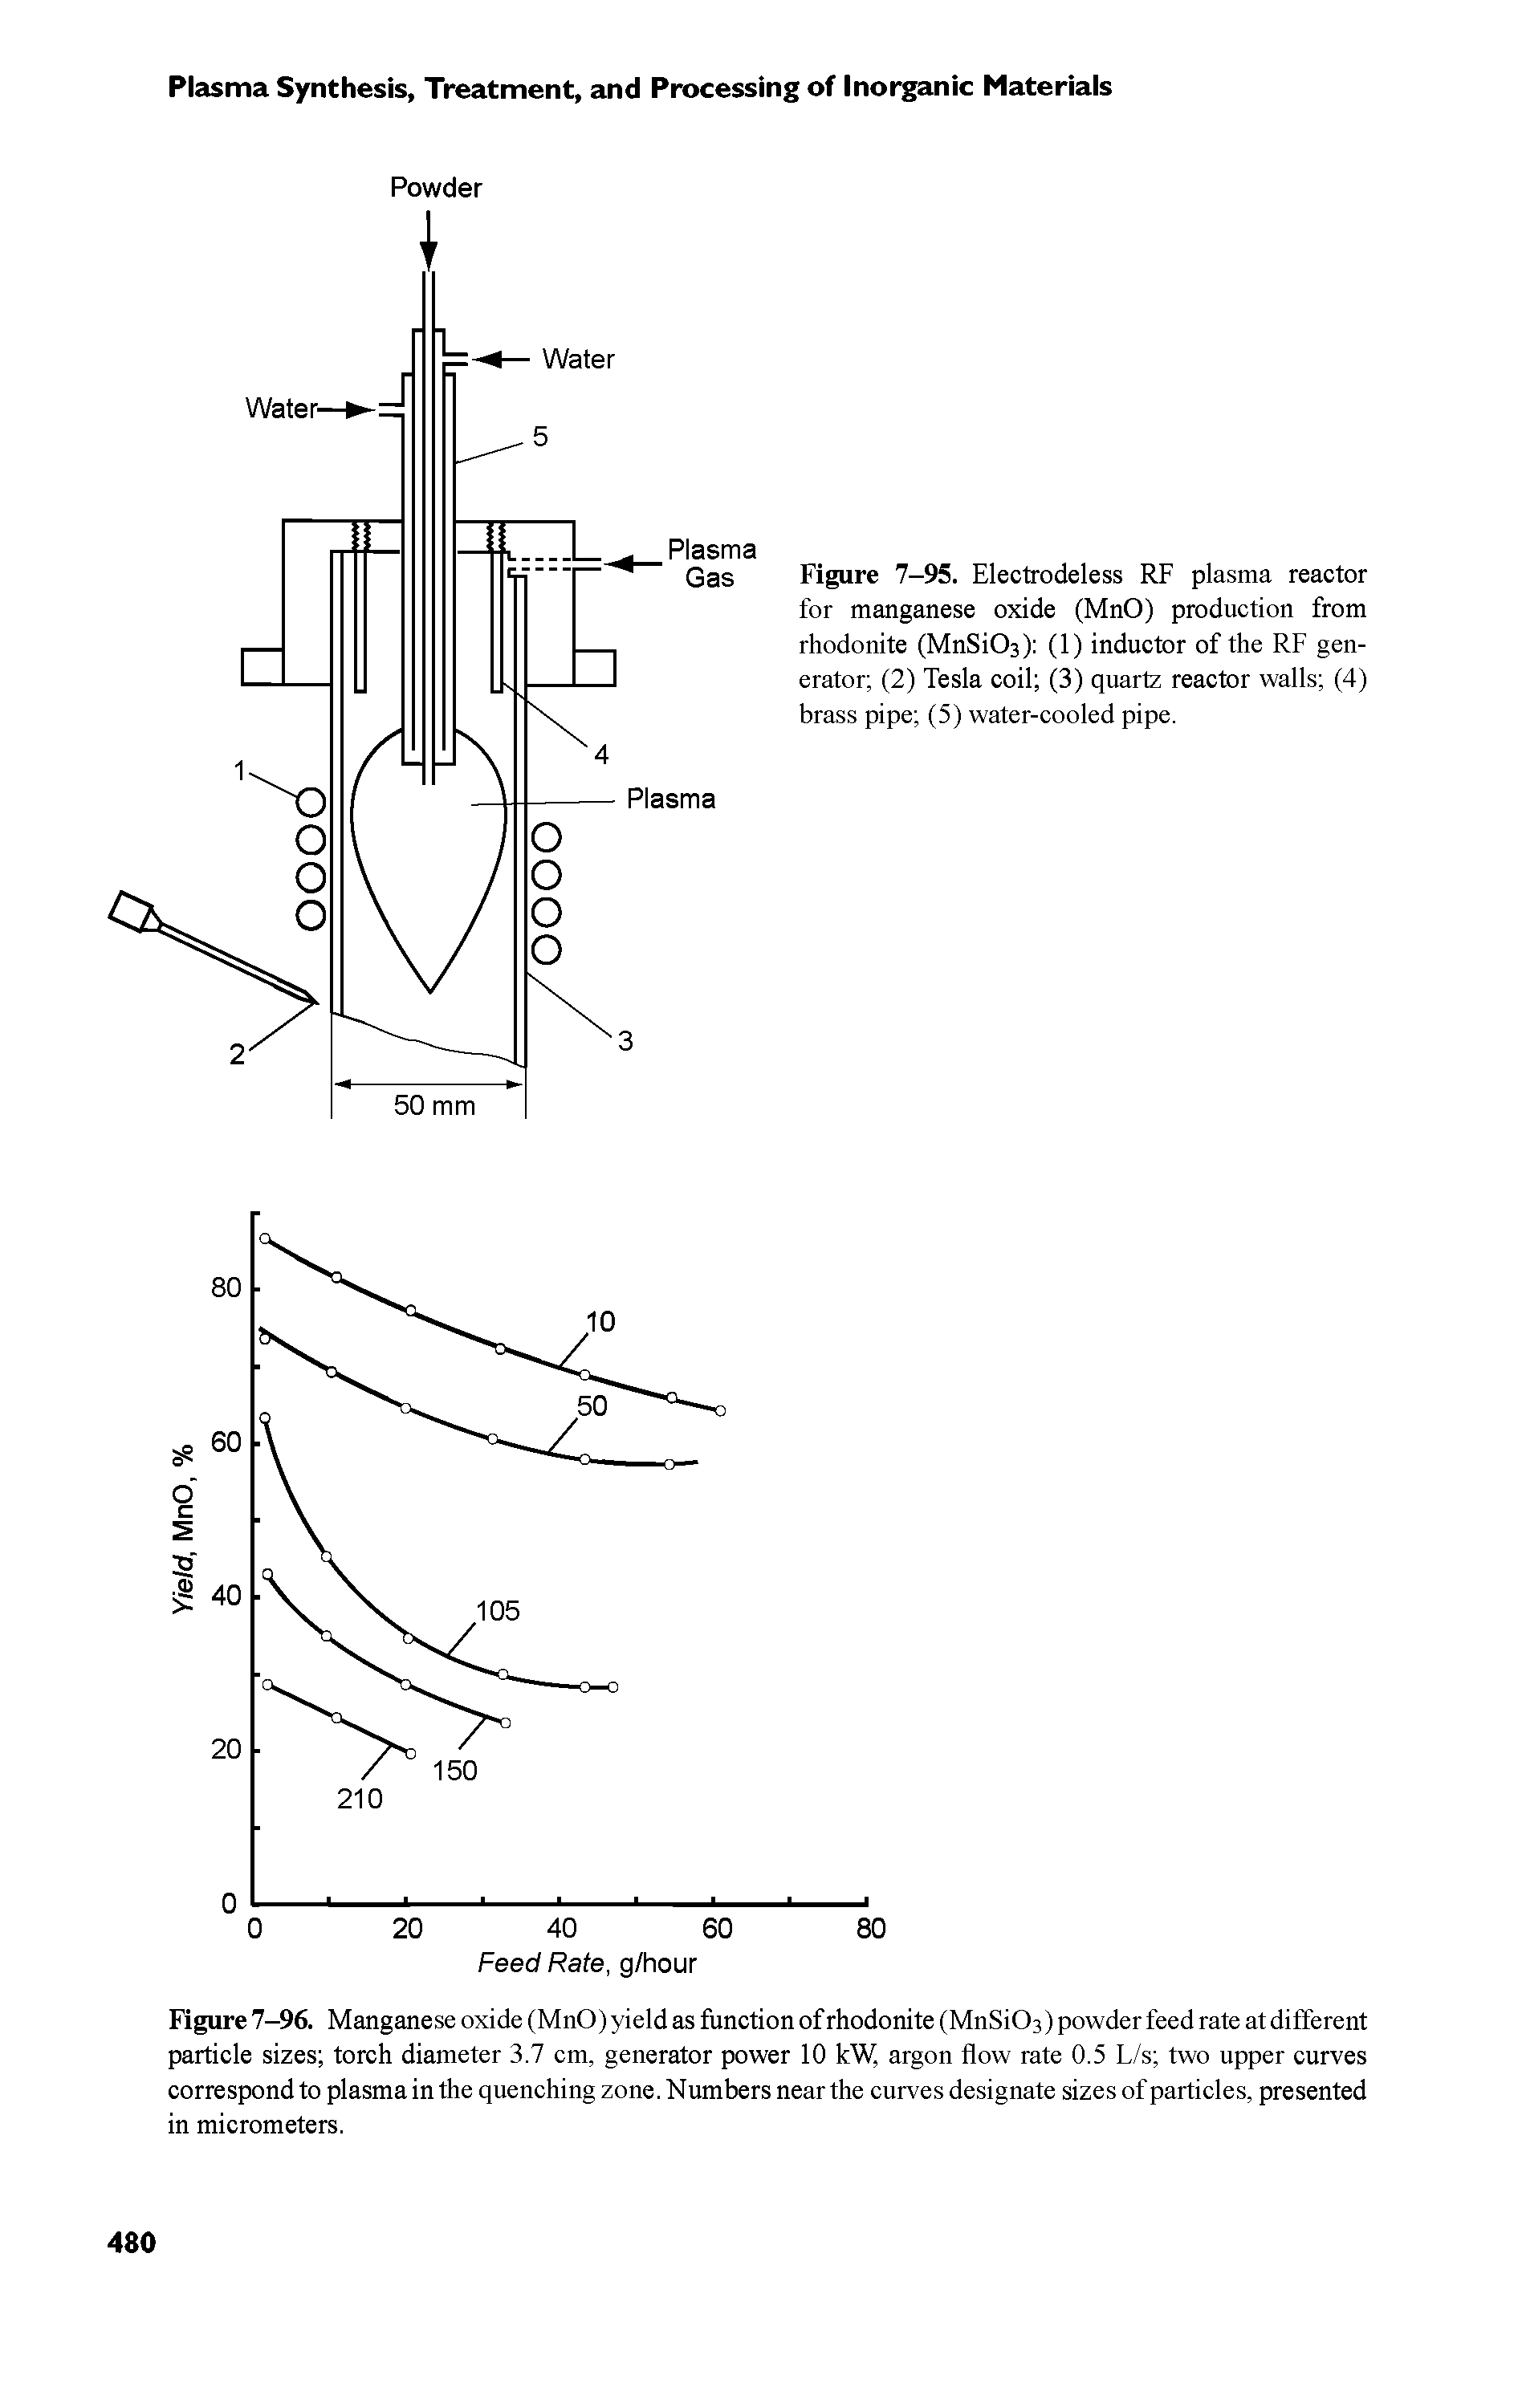 Figure 7-95. Electrodeless RF plasma reactor for manganese oxide (MnO) production from rhodonite (MnSiOs) (1) inductor of the RF generator (2) Tesla coil (3) quartz reactor walls (4) brass pipe (5) water-cooled pipe.